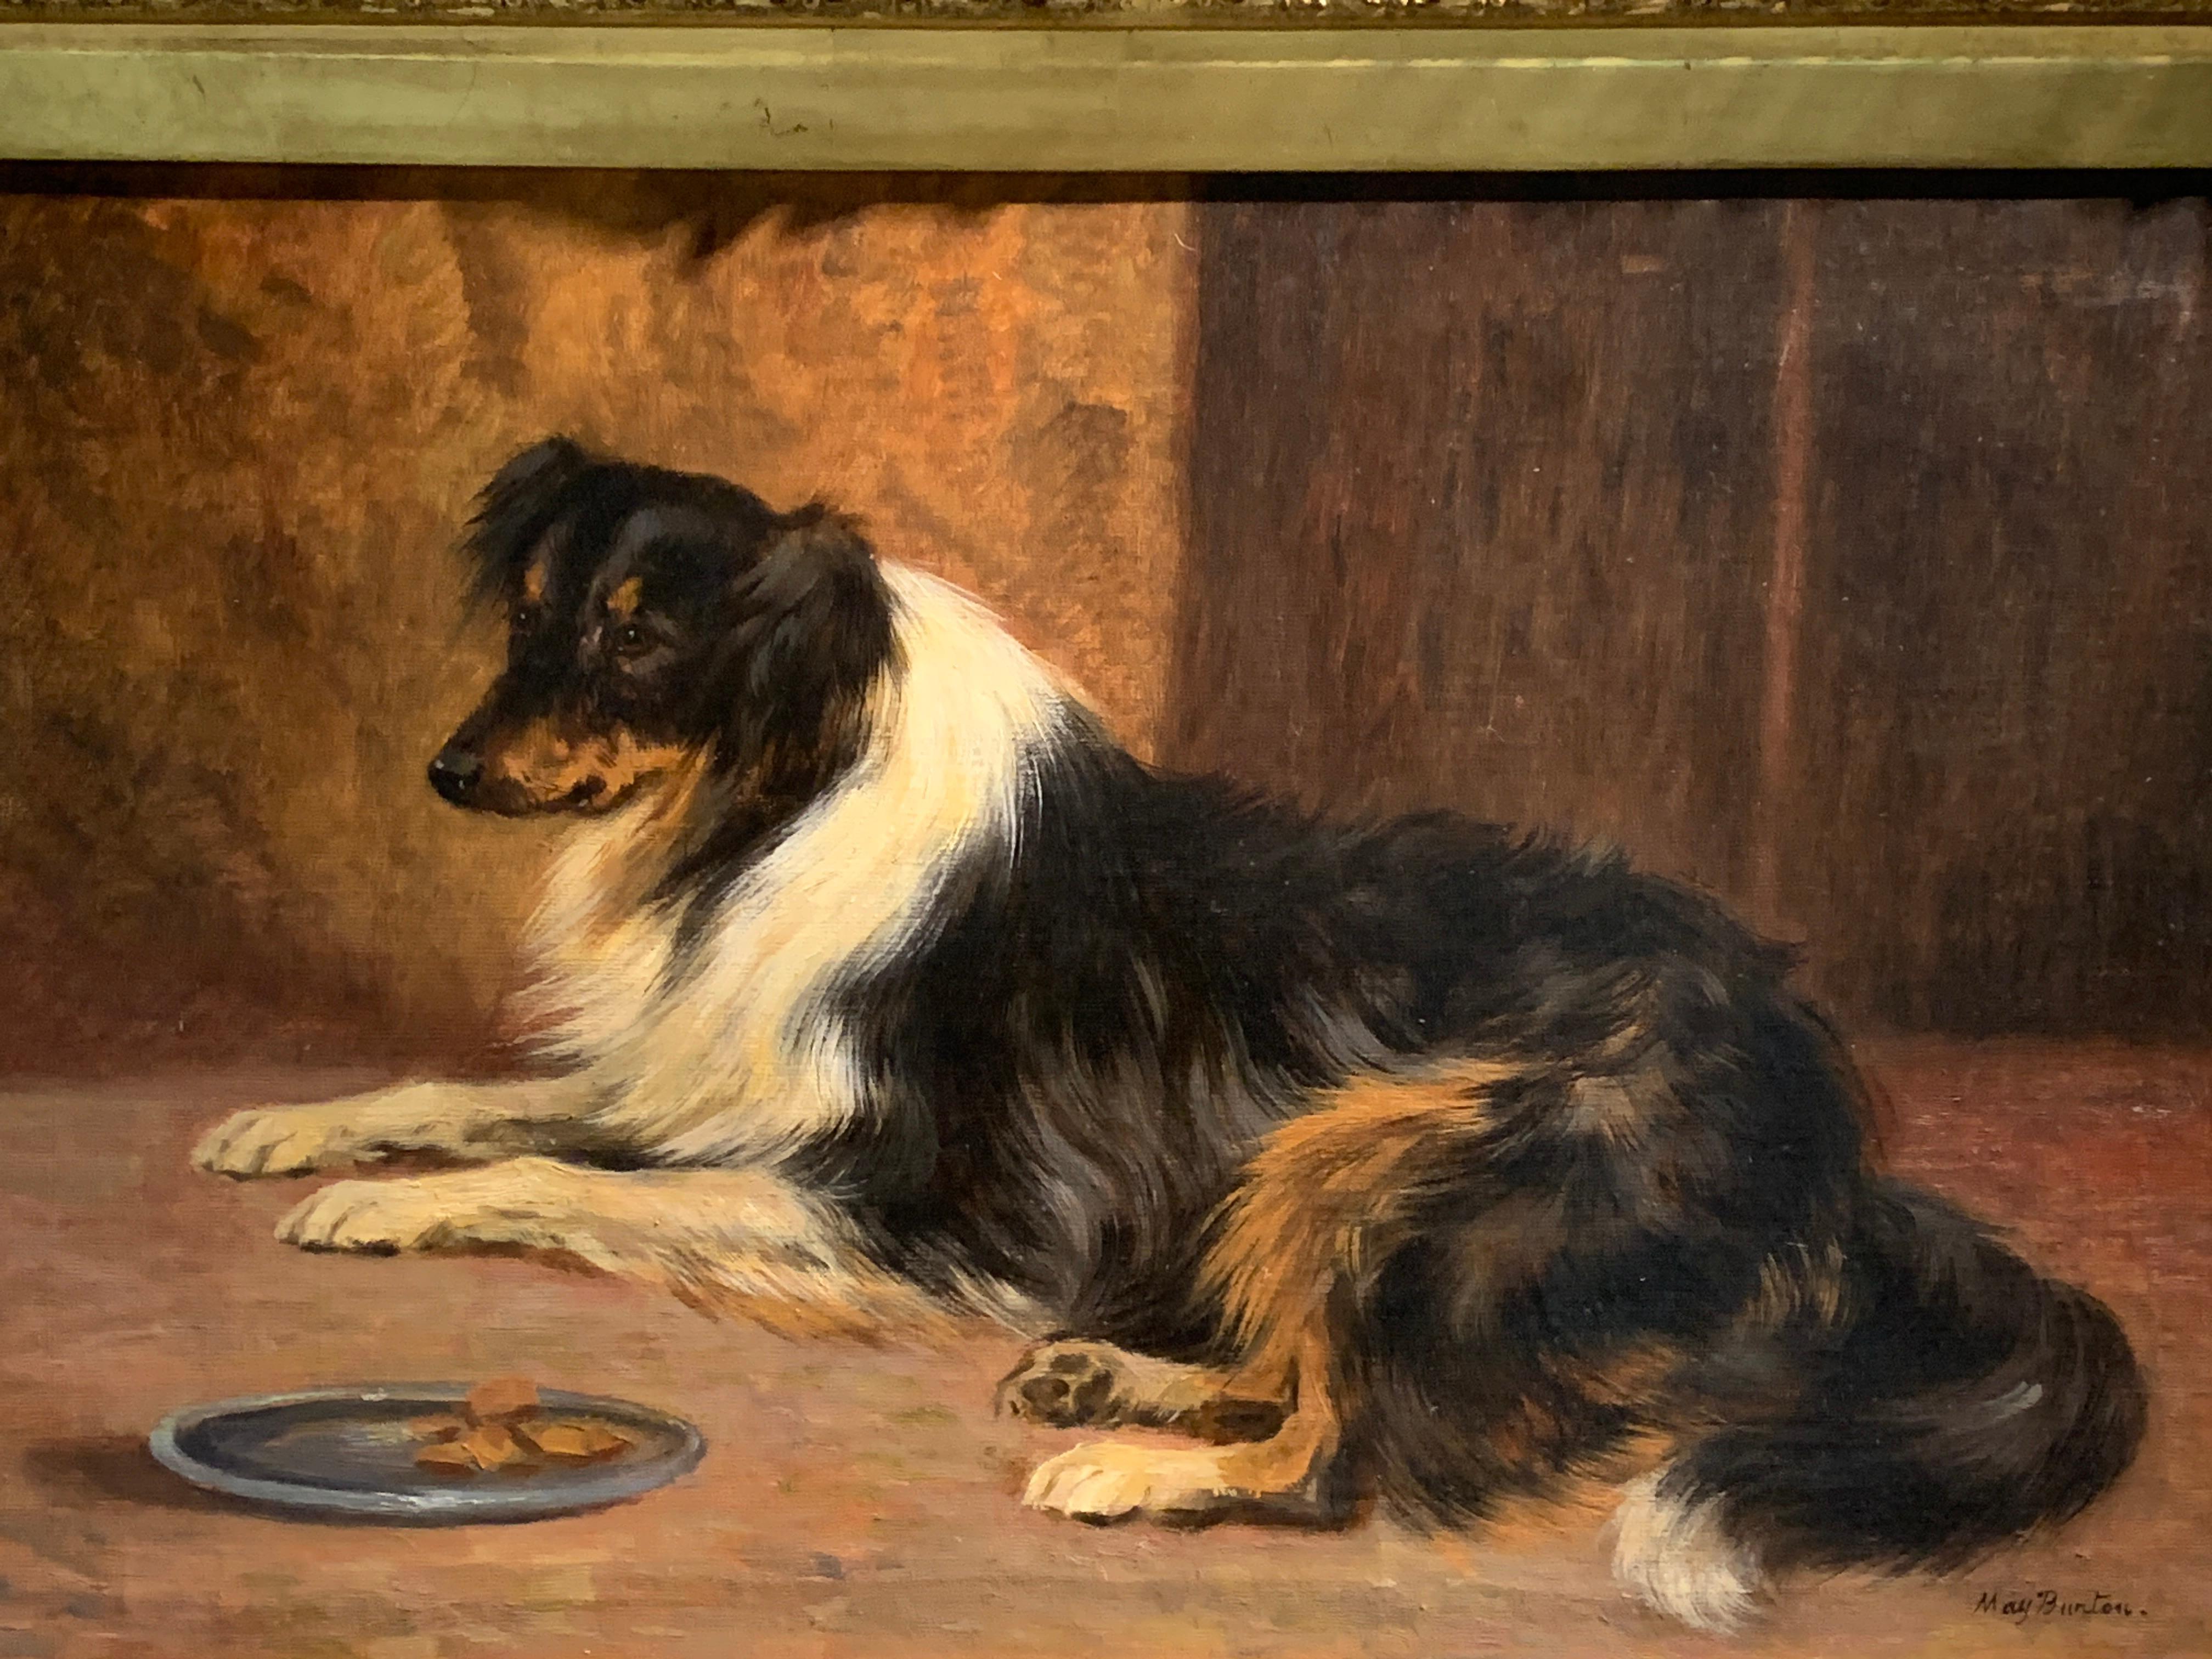 English early 20th century Portrait of a seated Collie dog  - Painting by May Burton